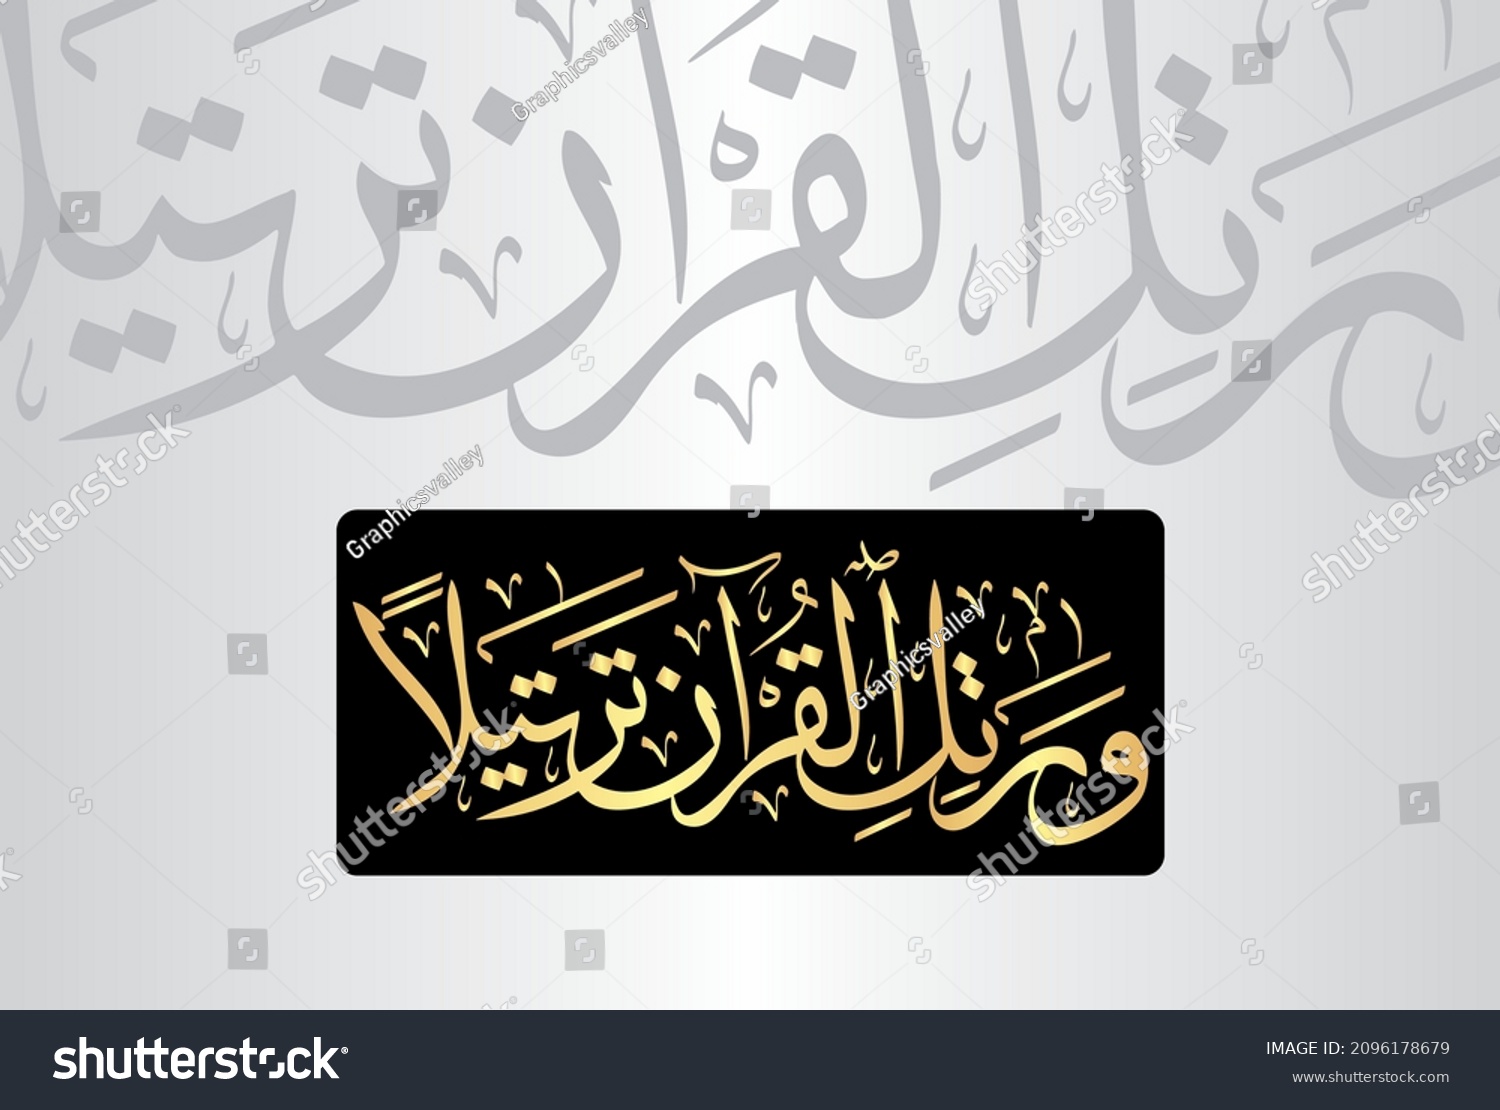 SVG of Arabic Calligraphy from verse number 4 from chapter 